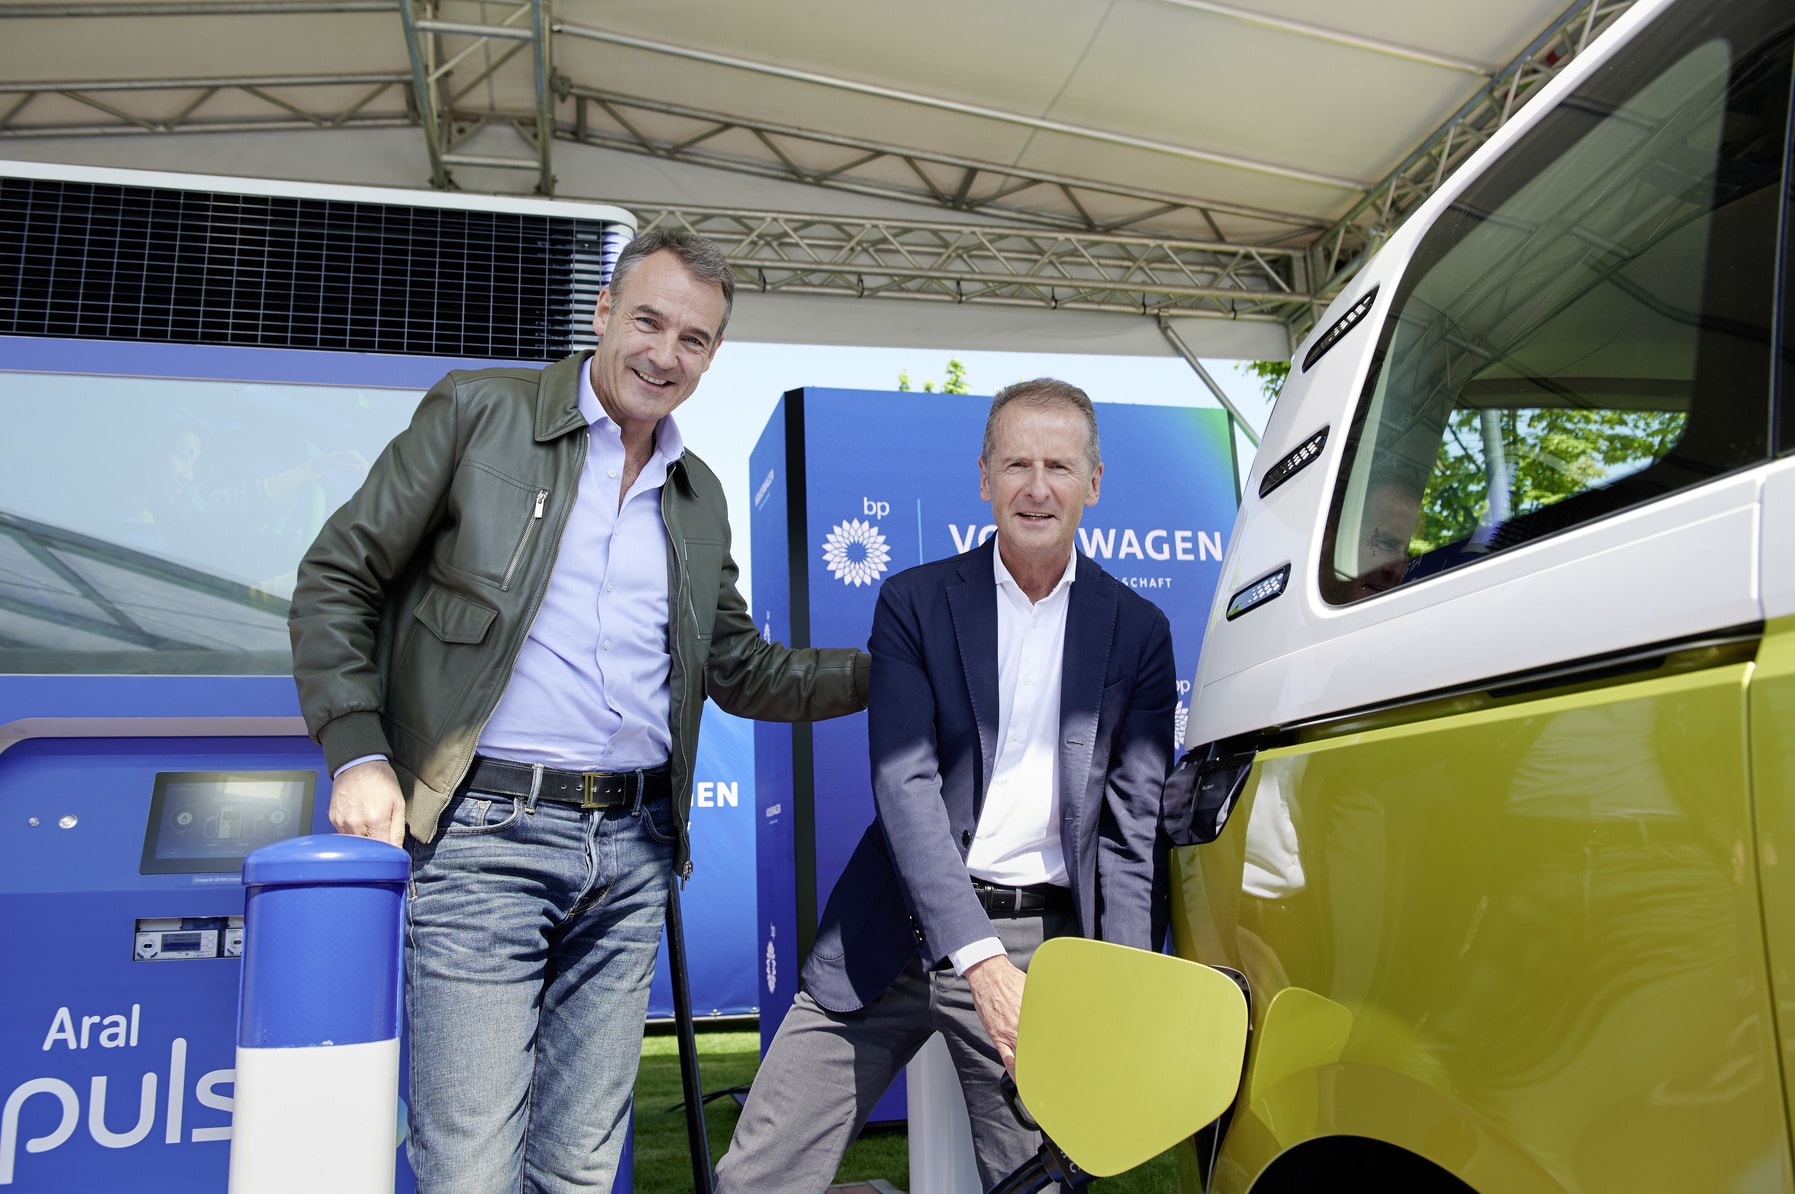 Volkswagen Group and bp launch strategic partnership to rapidly rollout EV fast charging in Europe